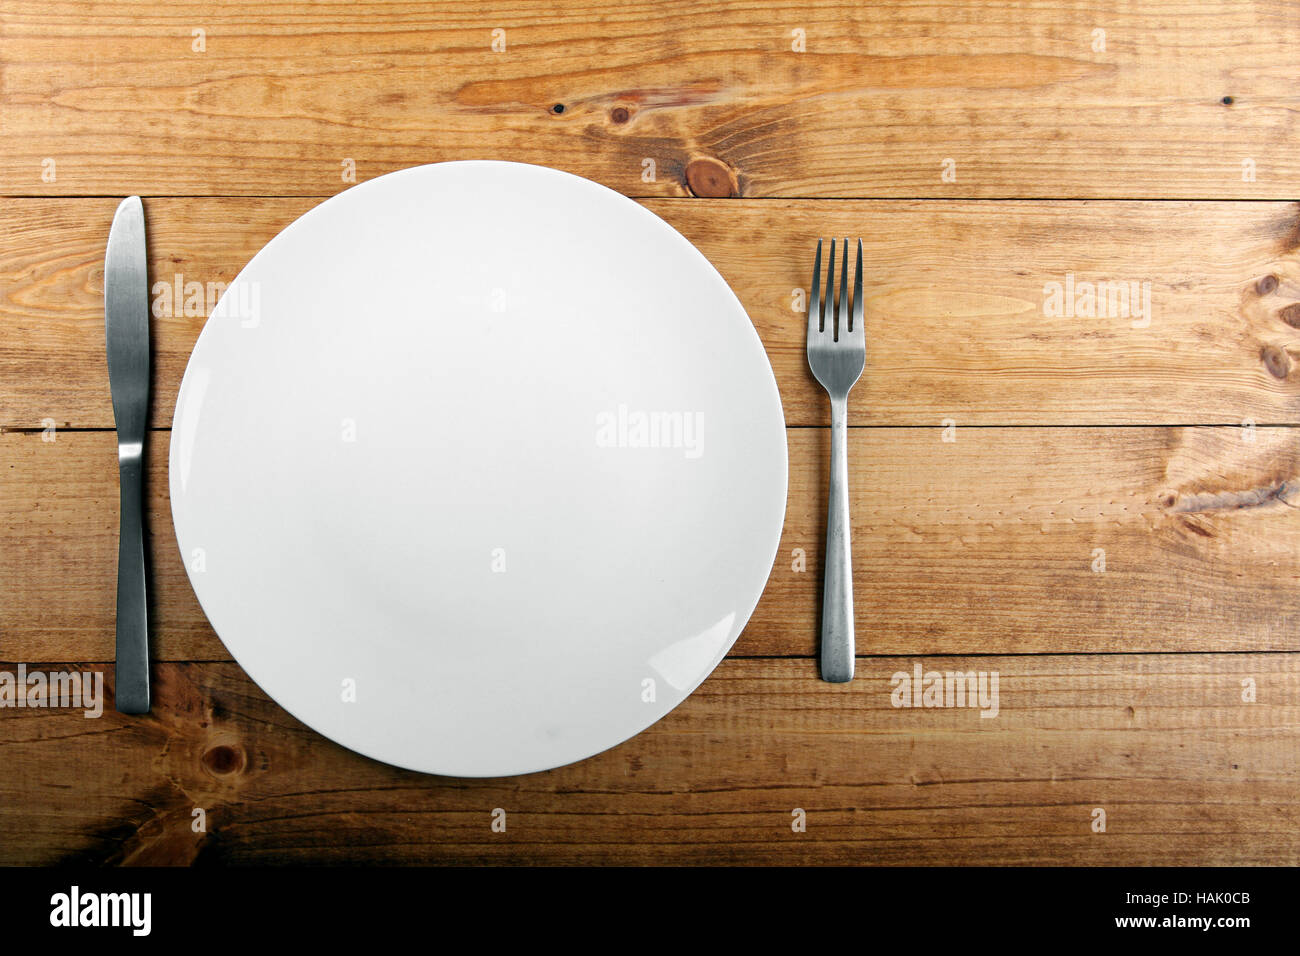 empty white plate on brown wooden table Stock Photo